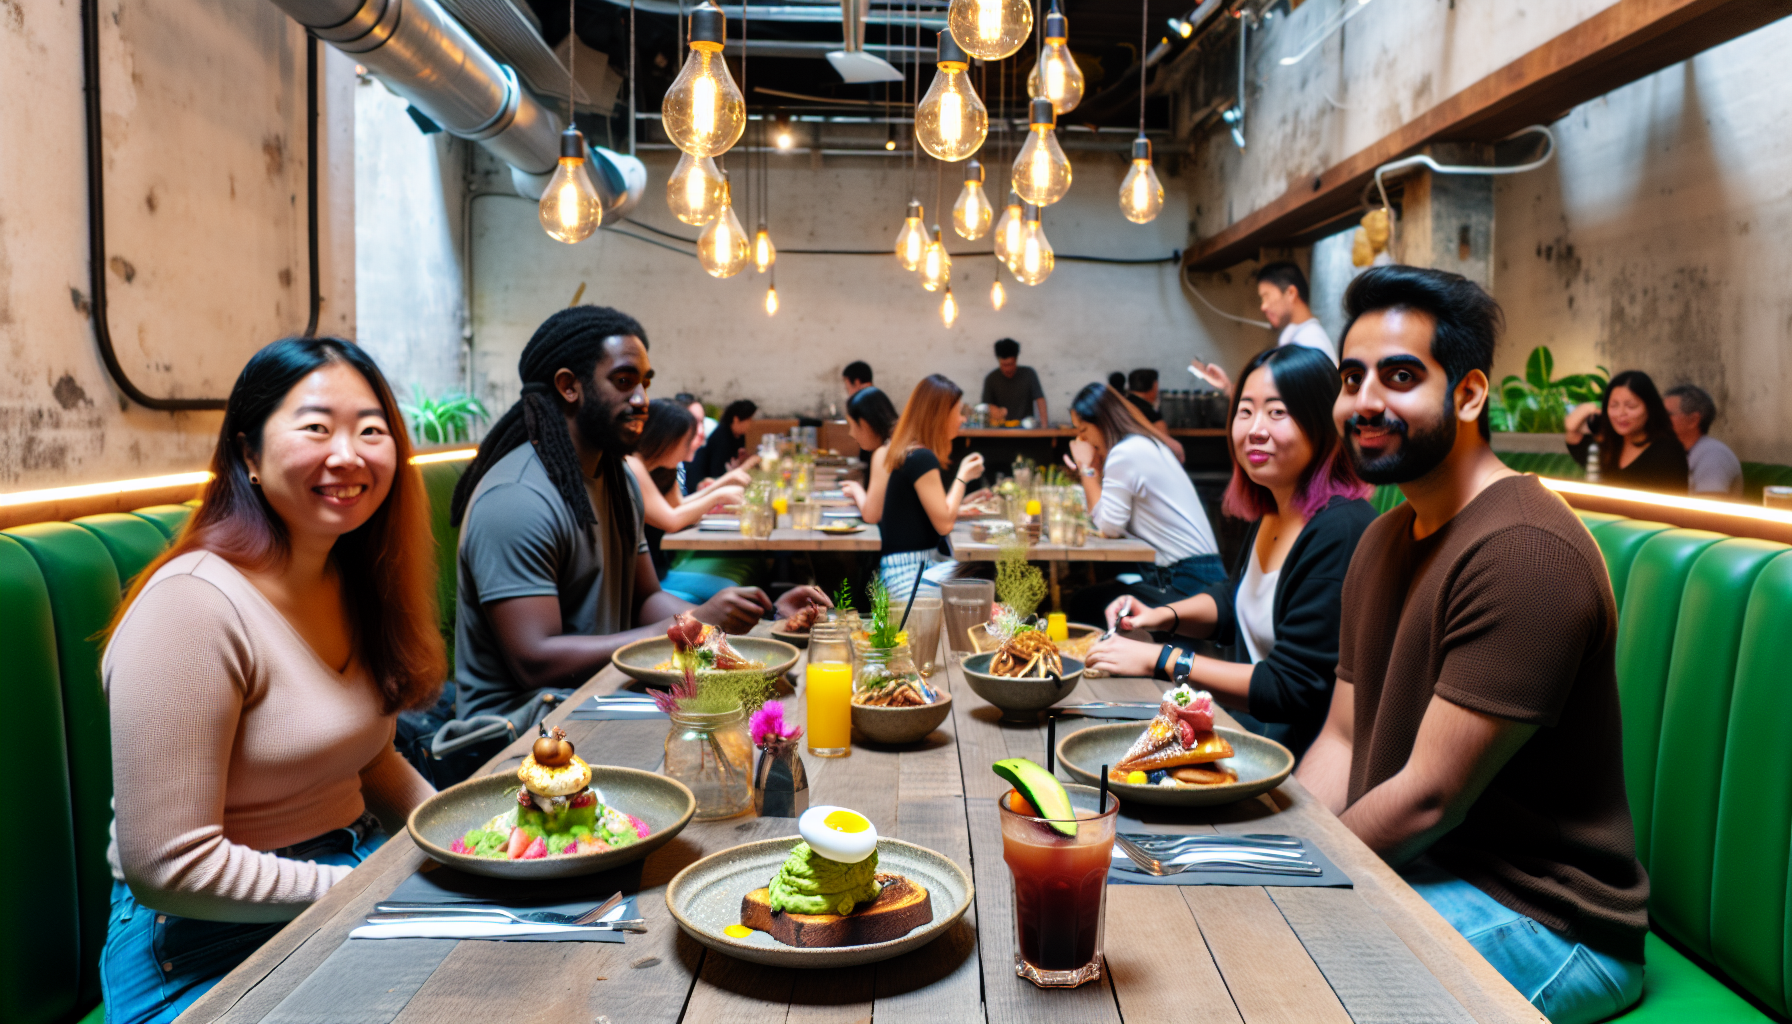 Unconventional brunch with immersive dining experience